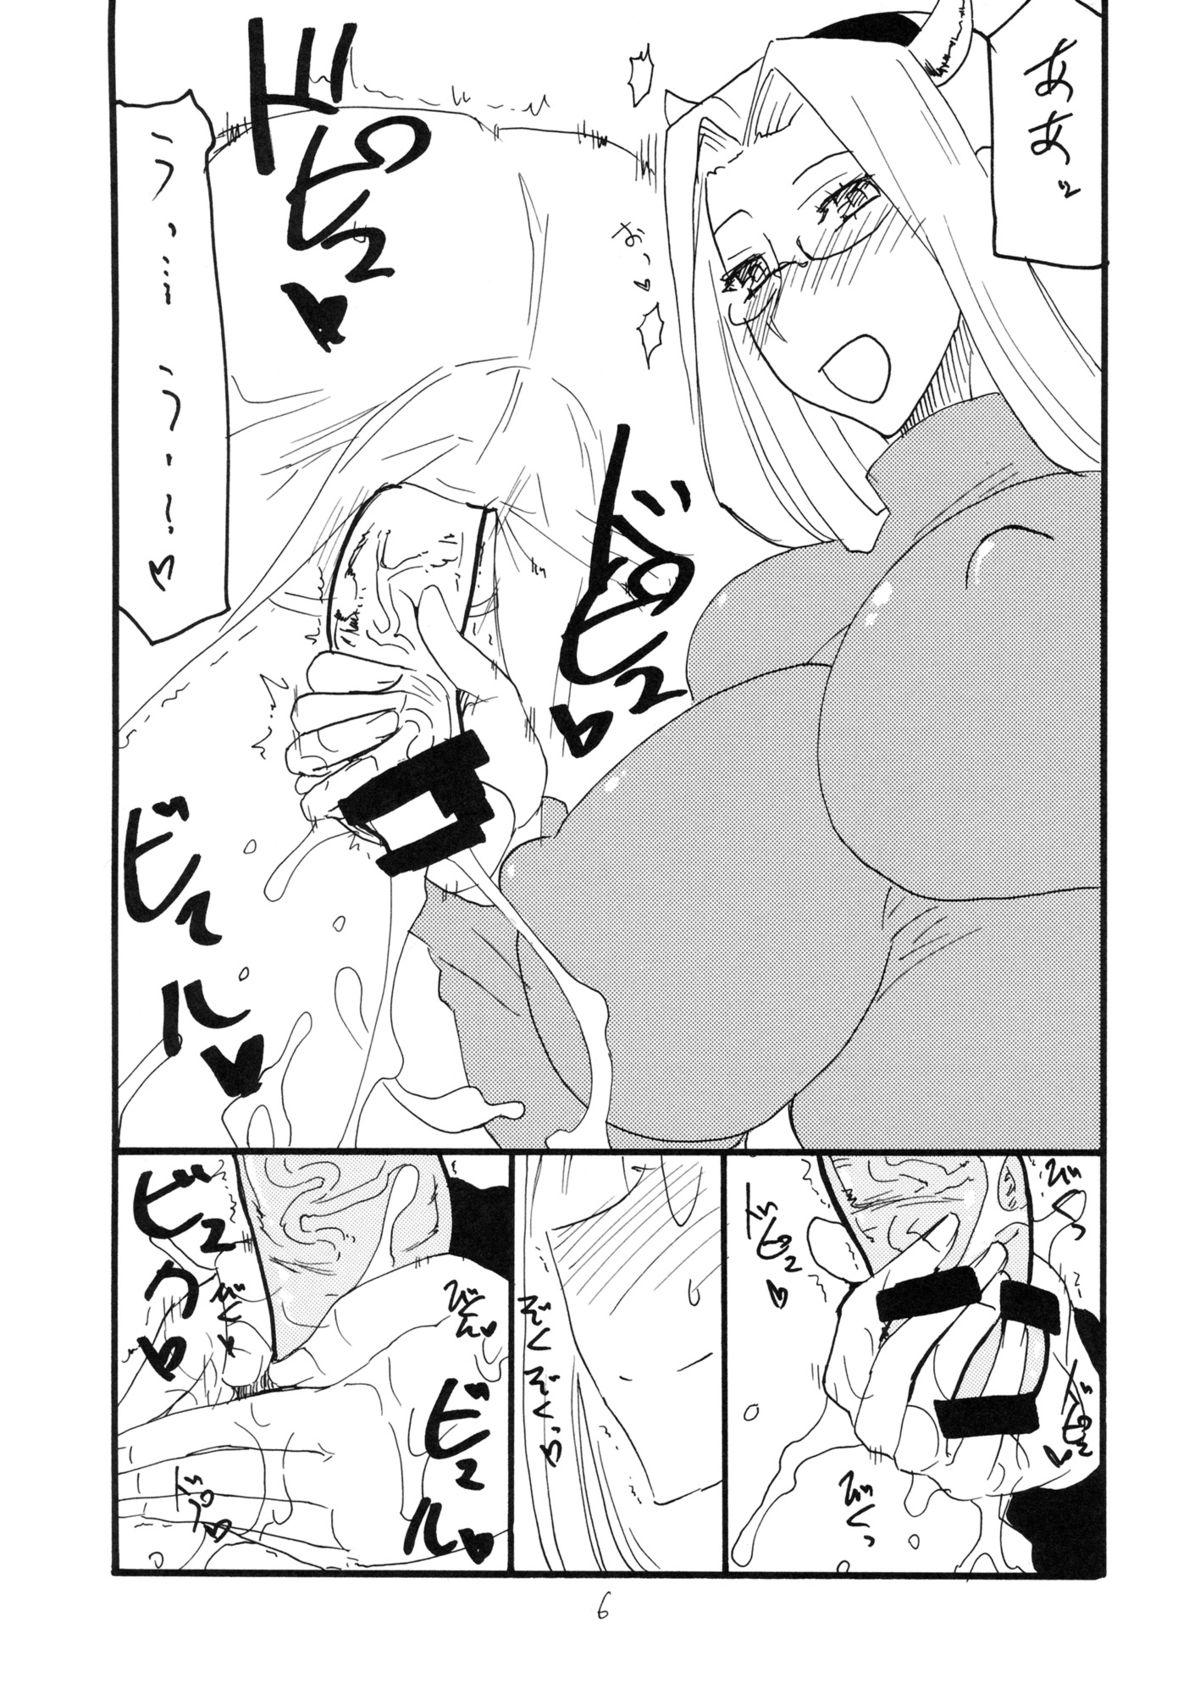 Great Fuck Usshisshi - Fate stay night Point Of View - Page 5